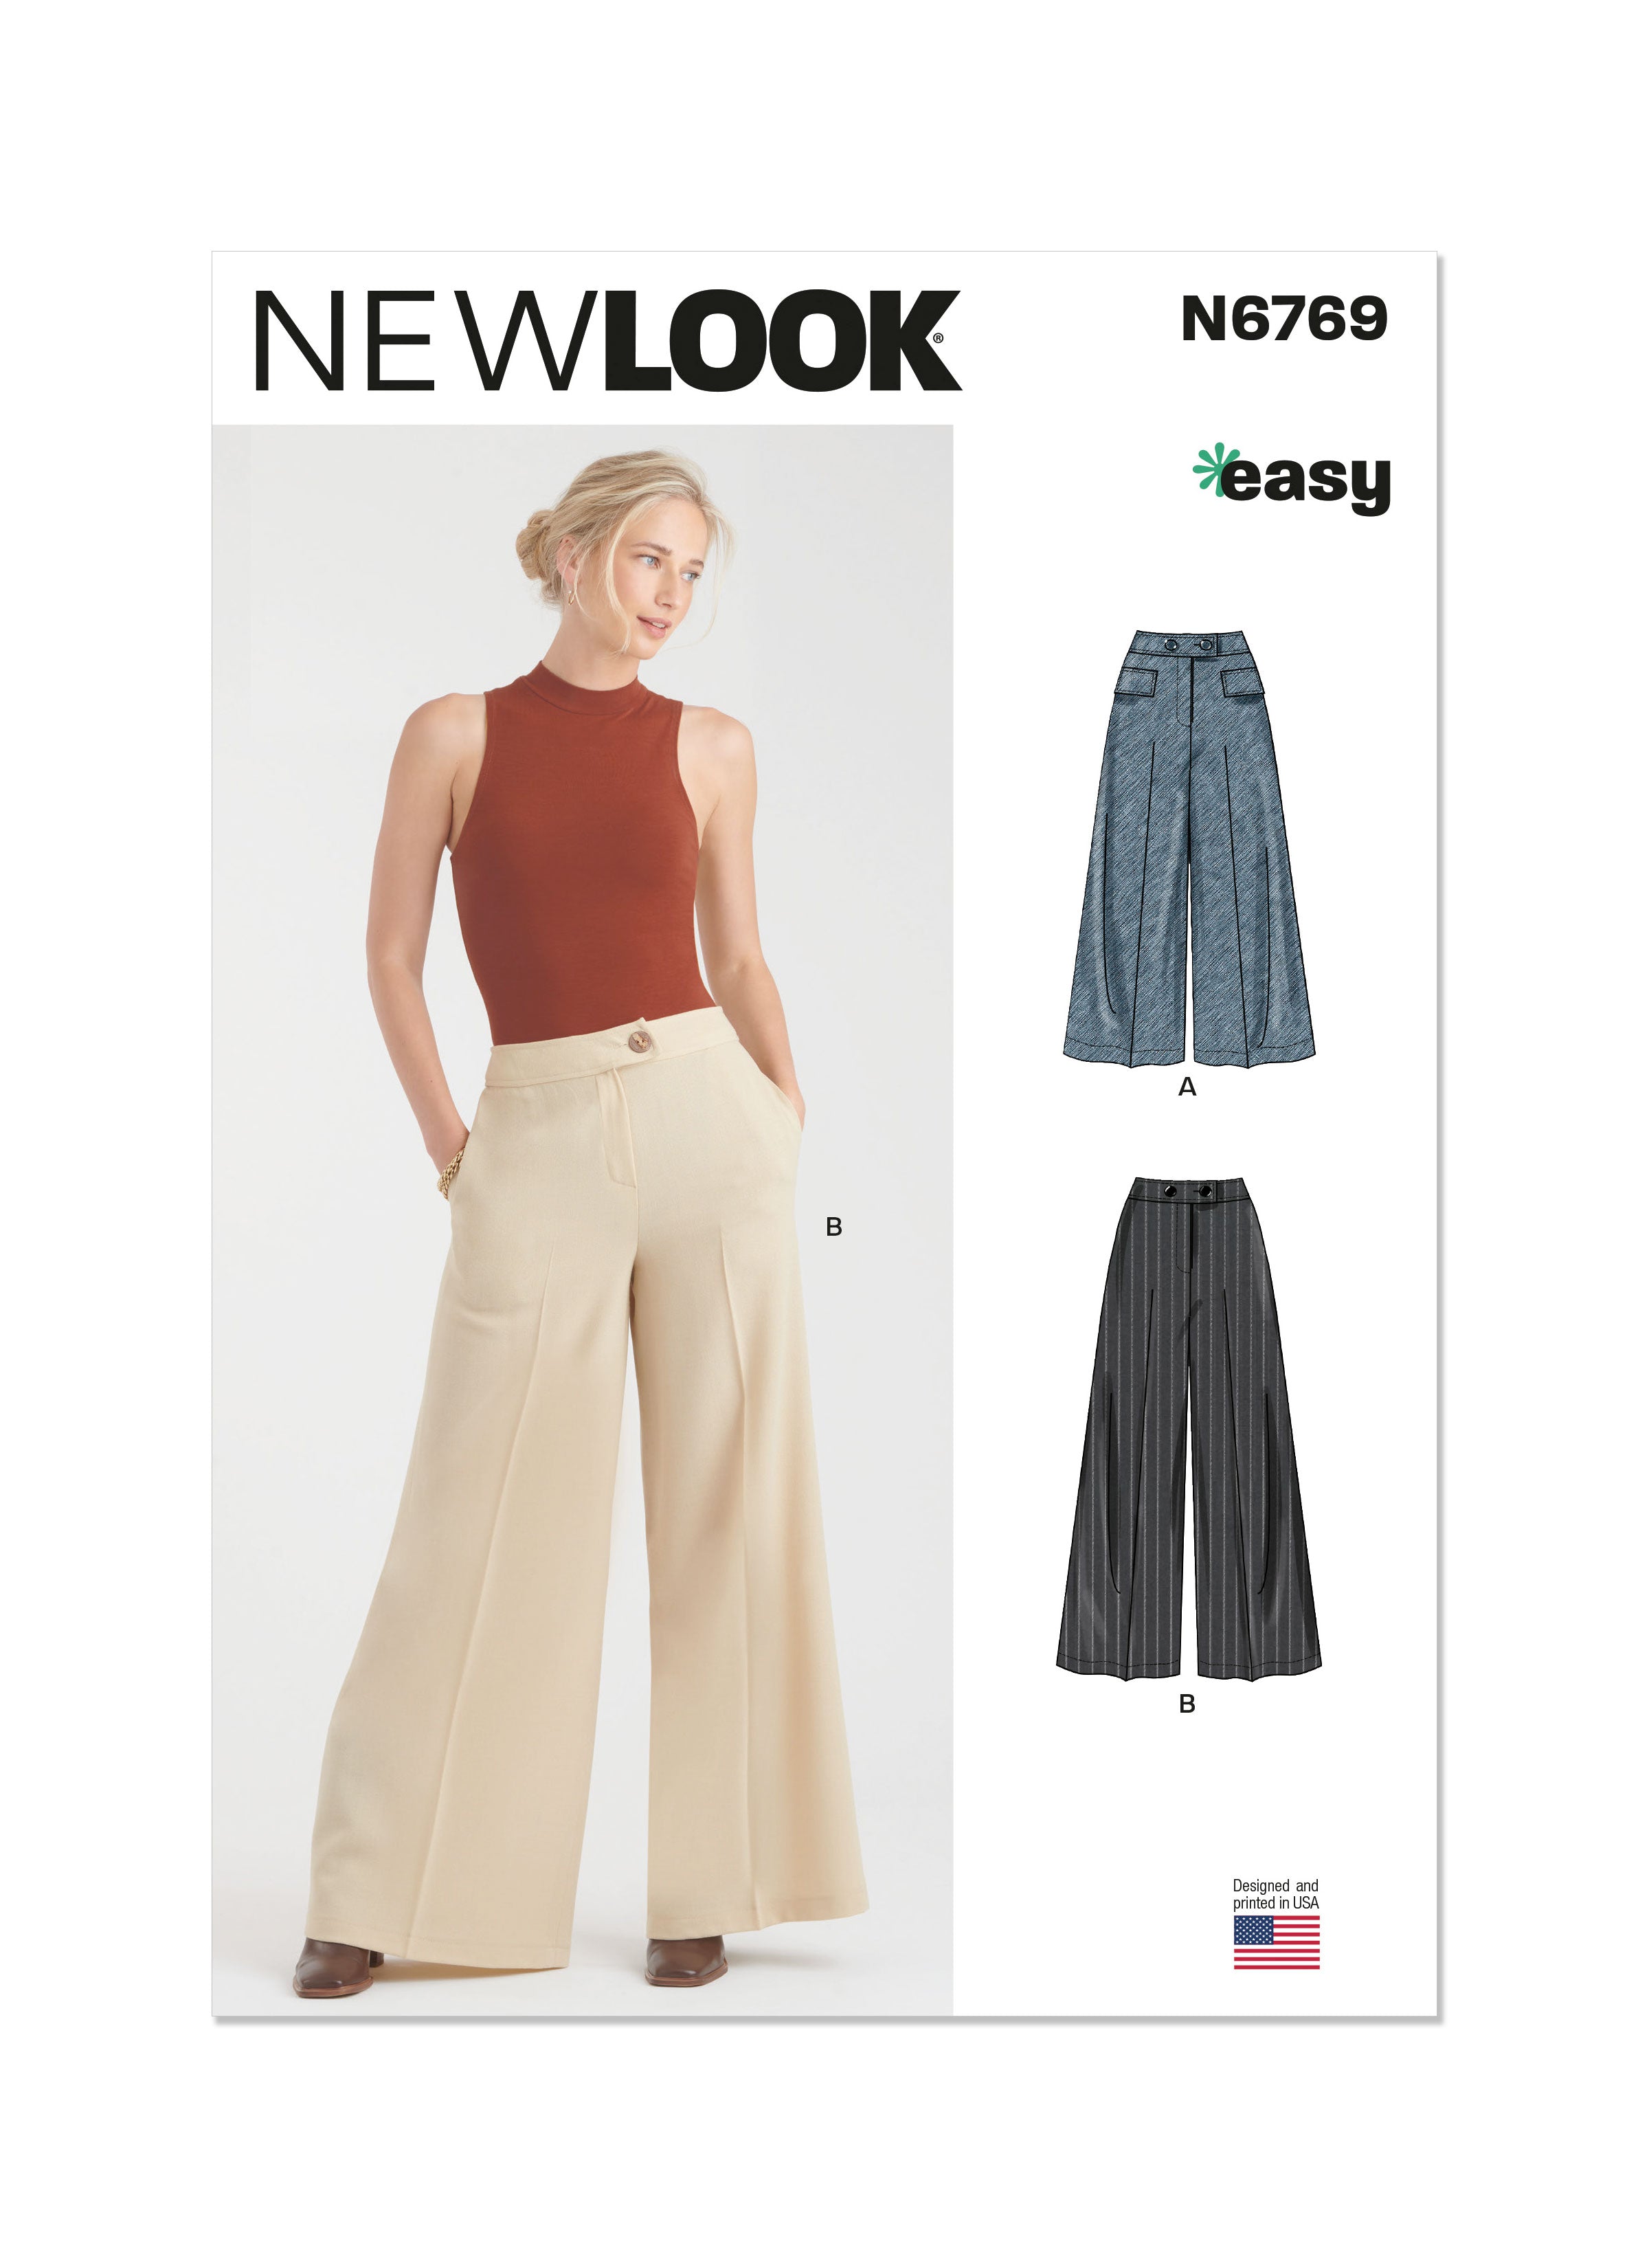 New Look Sewing Pattern 6769 Misses' / Petite Pants from Jaycotts Sewing Supplies